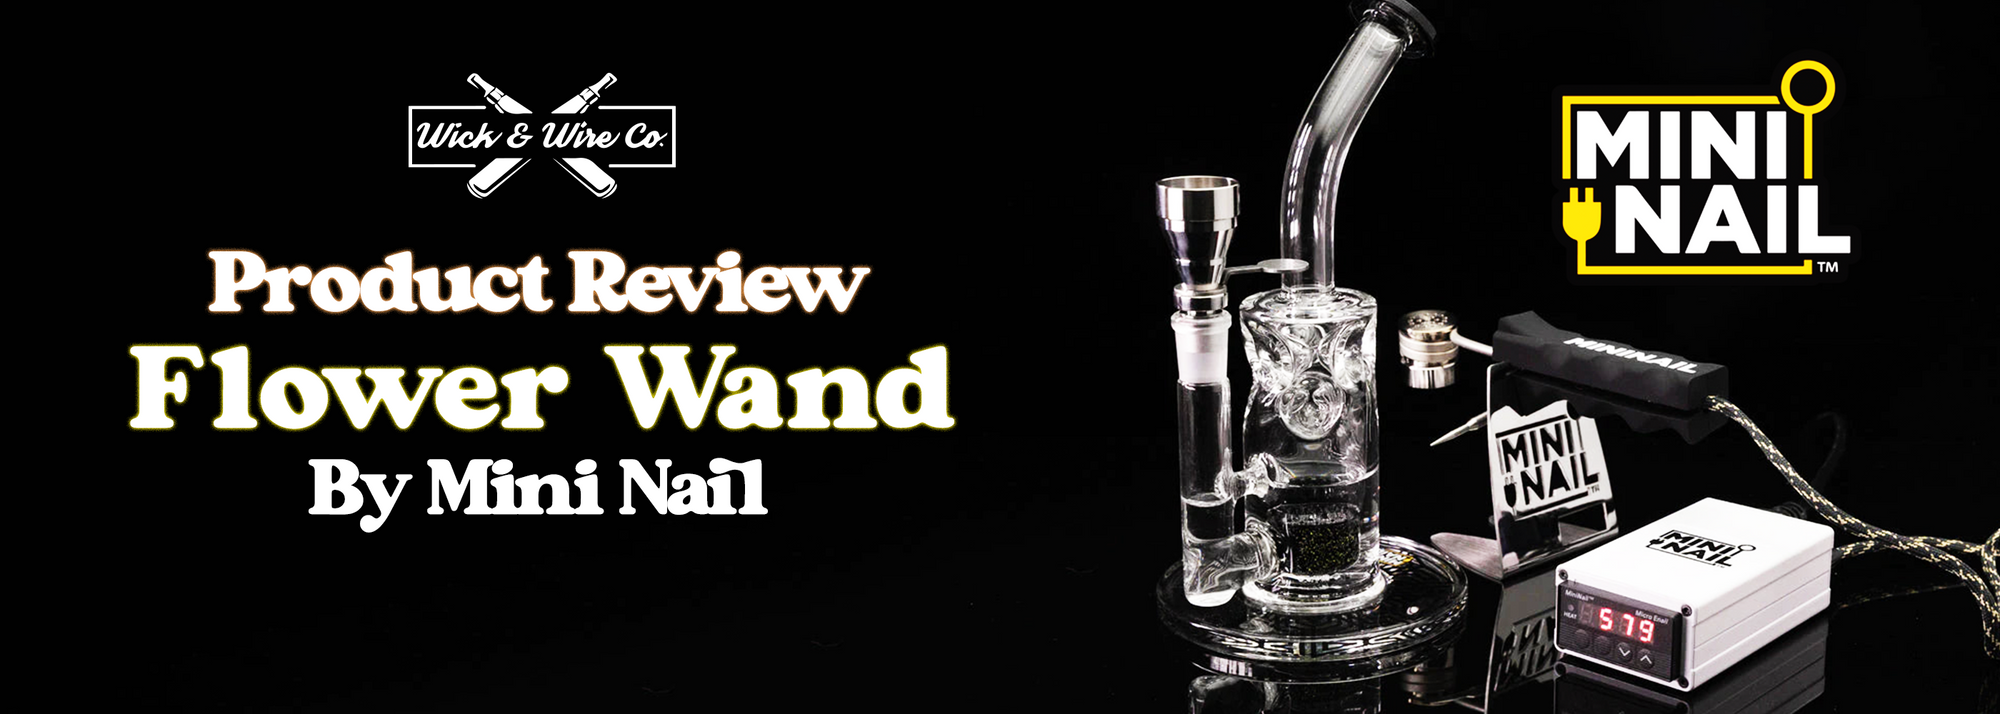 Flower Wand by Mini Nail Product Review - Wick and Wire Co Melbourne Vape Shop, Victoria Australia